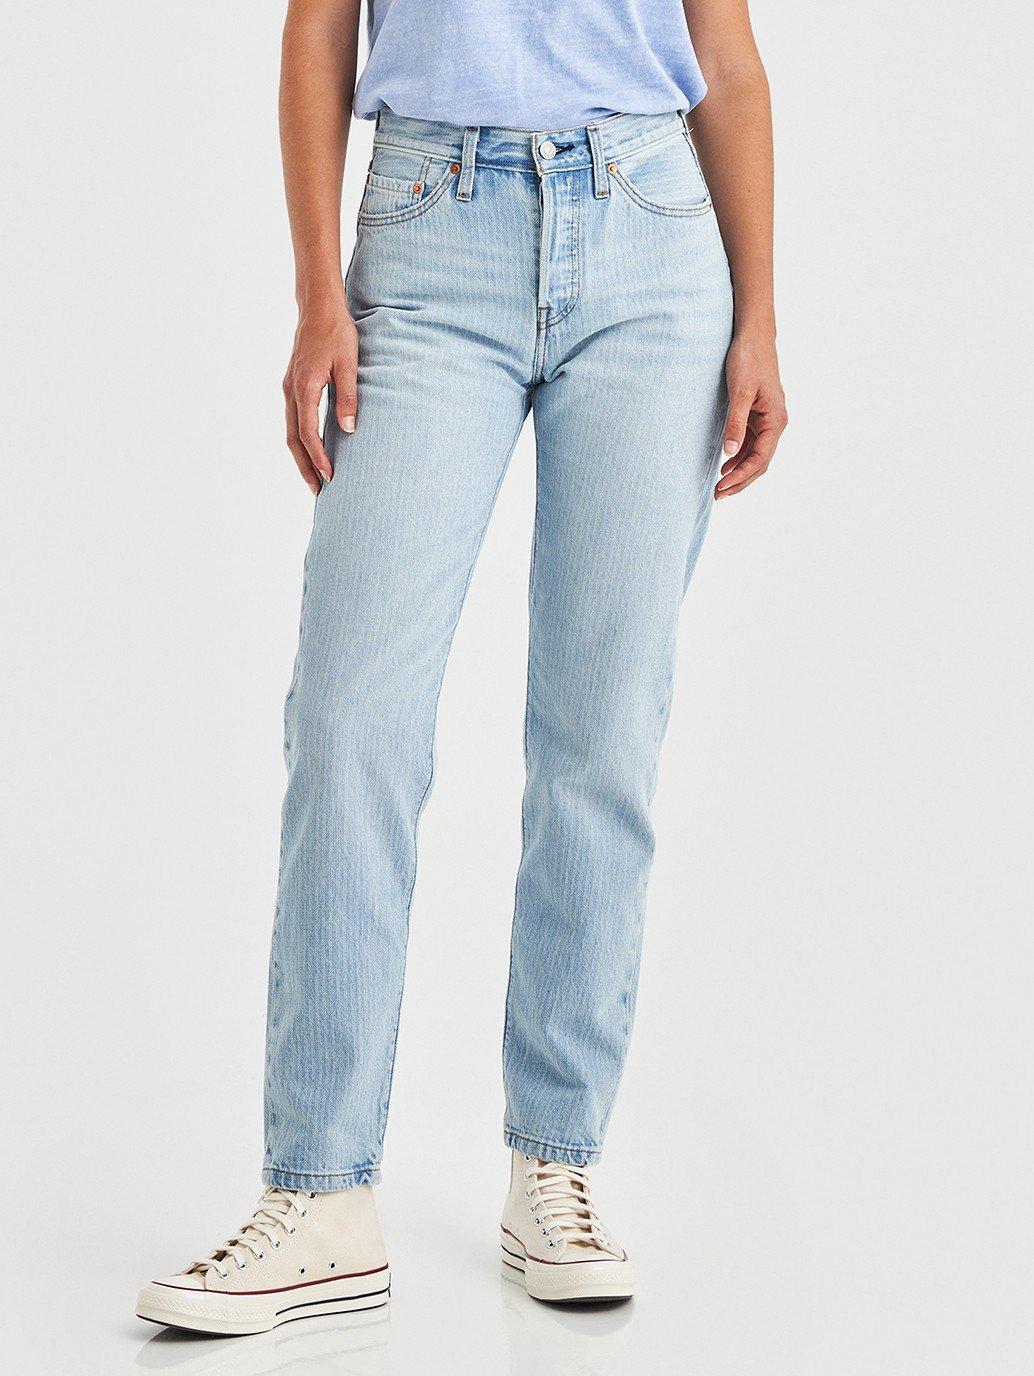 Buy Women's 501® '81 Jeans| Official Online Store PH